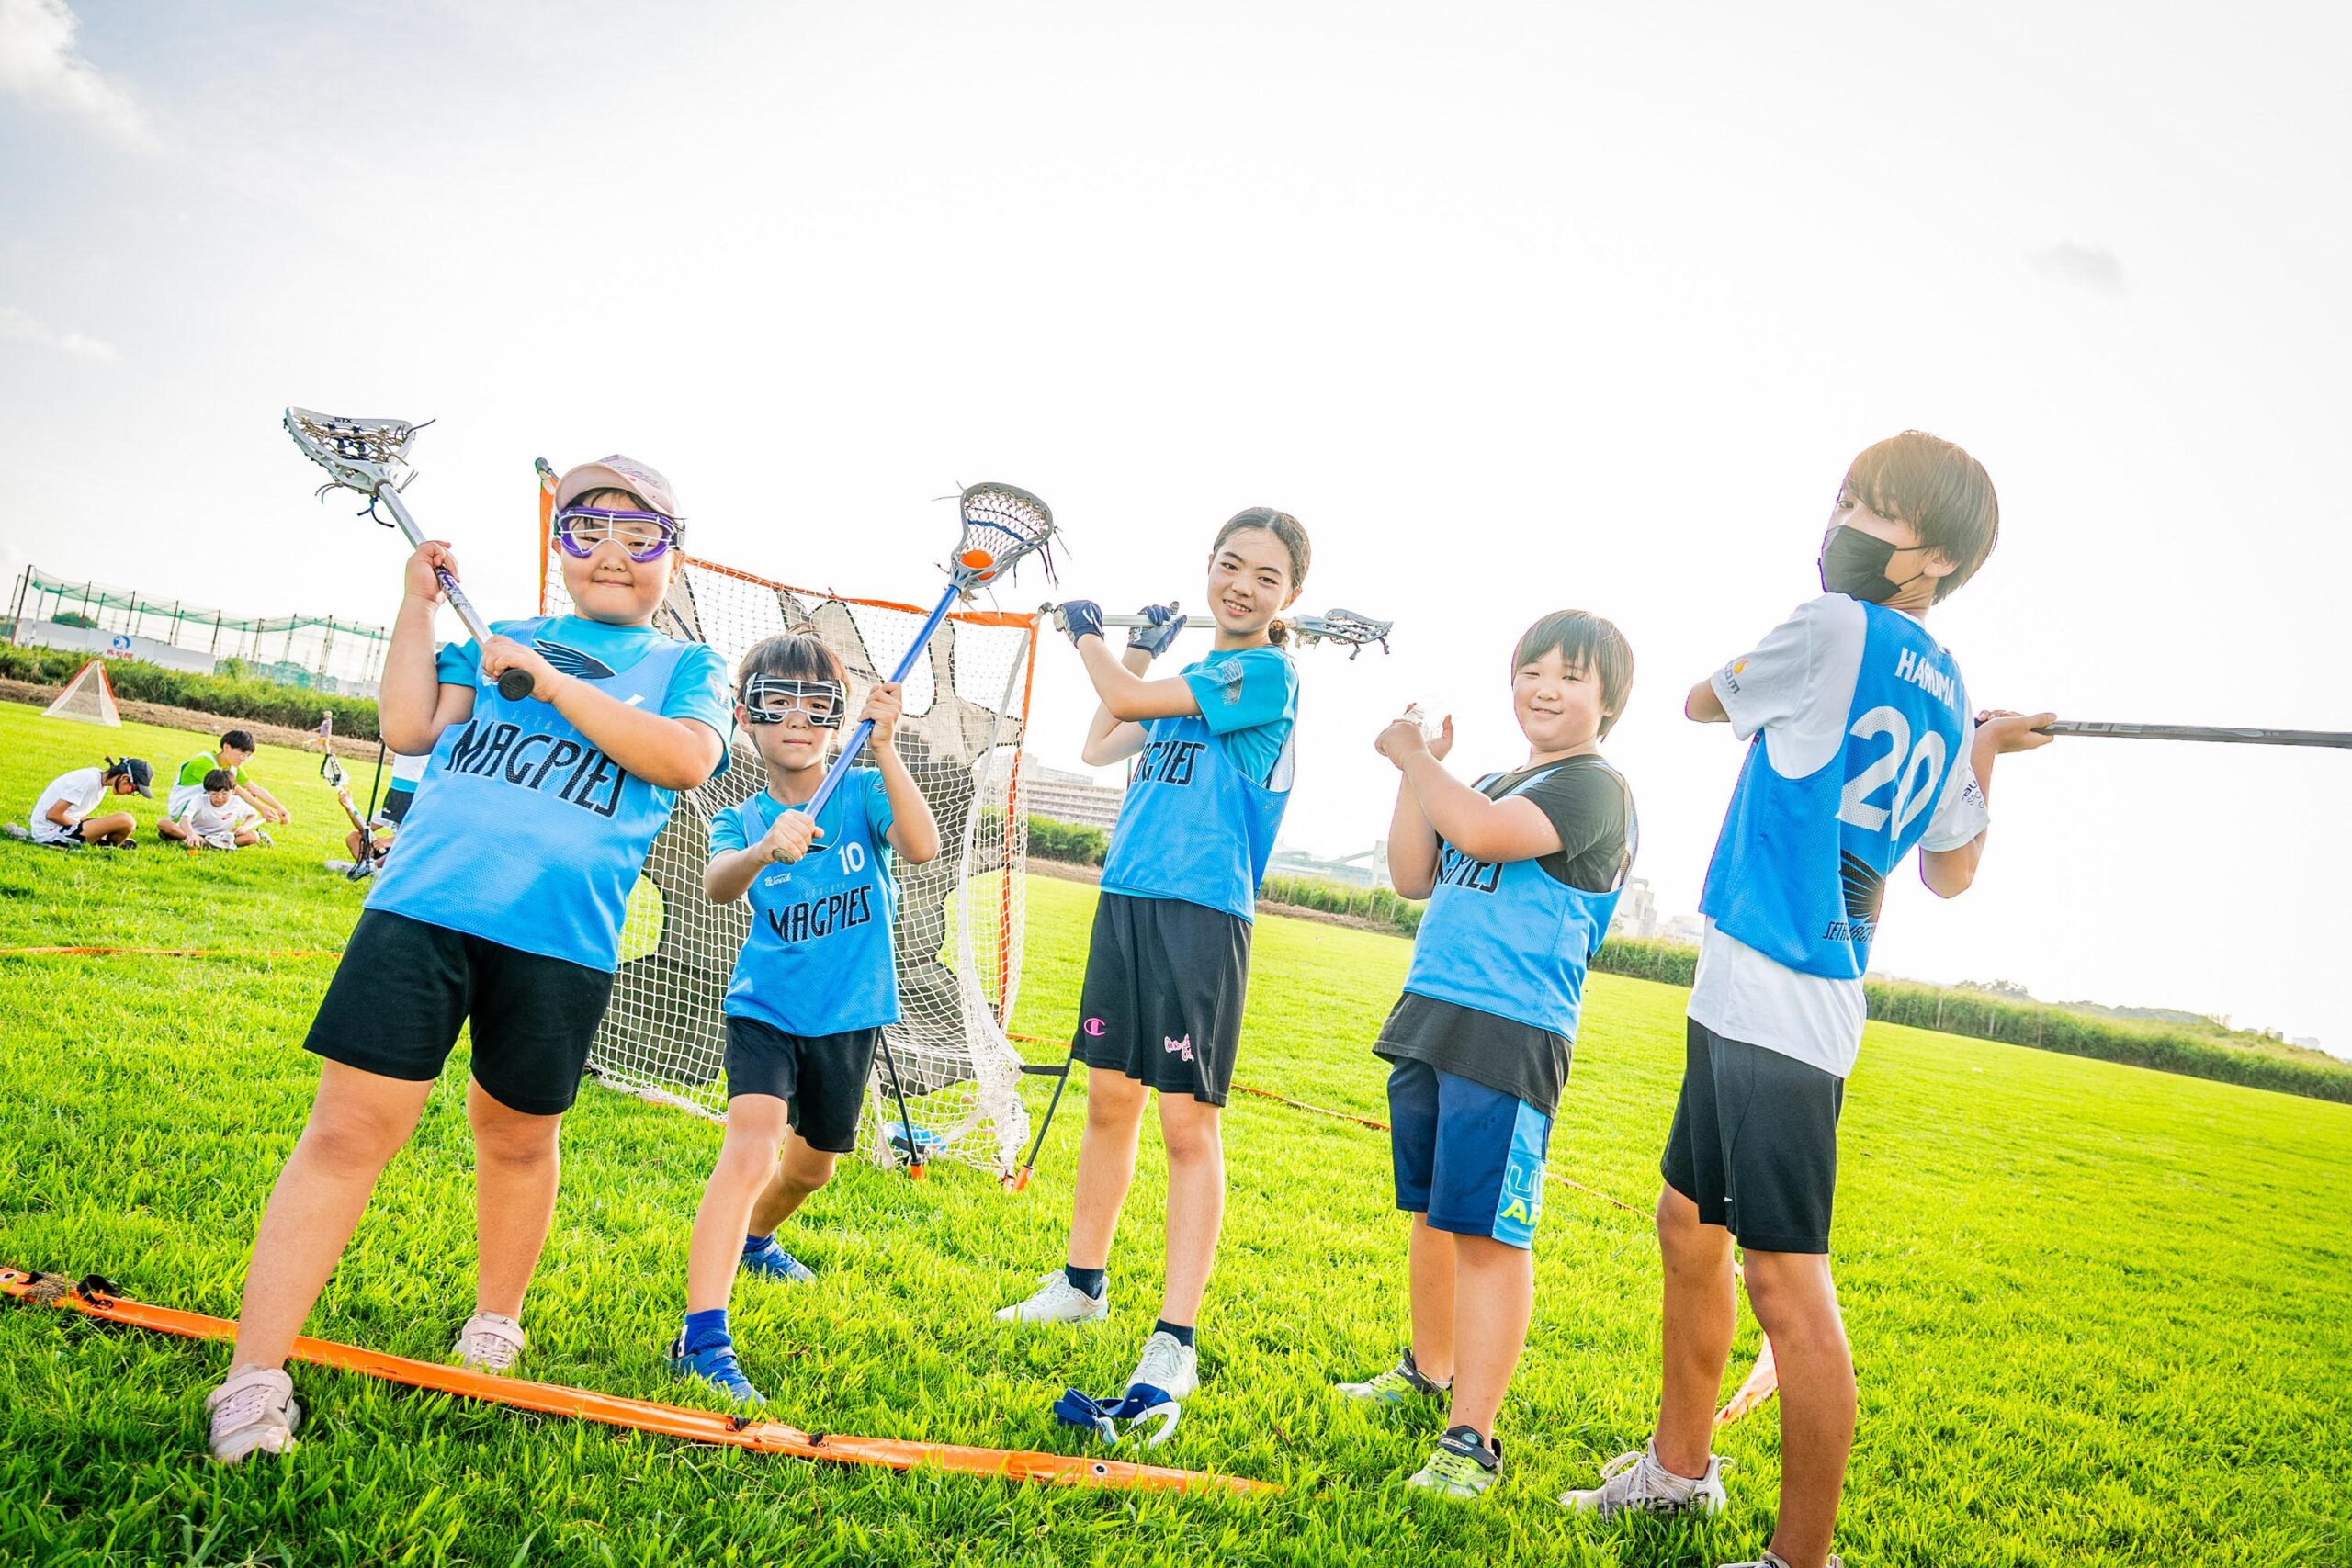 Group of young lacrosse players posing for a photo with their sticks